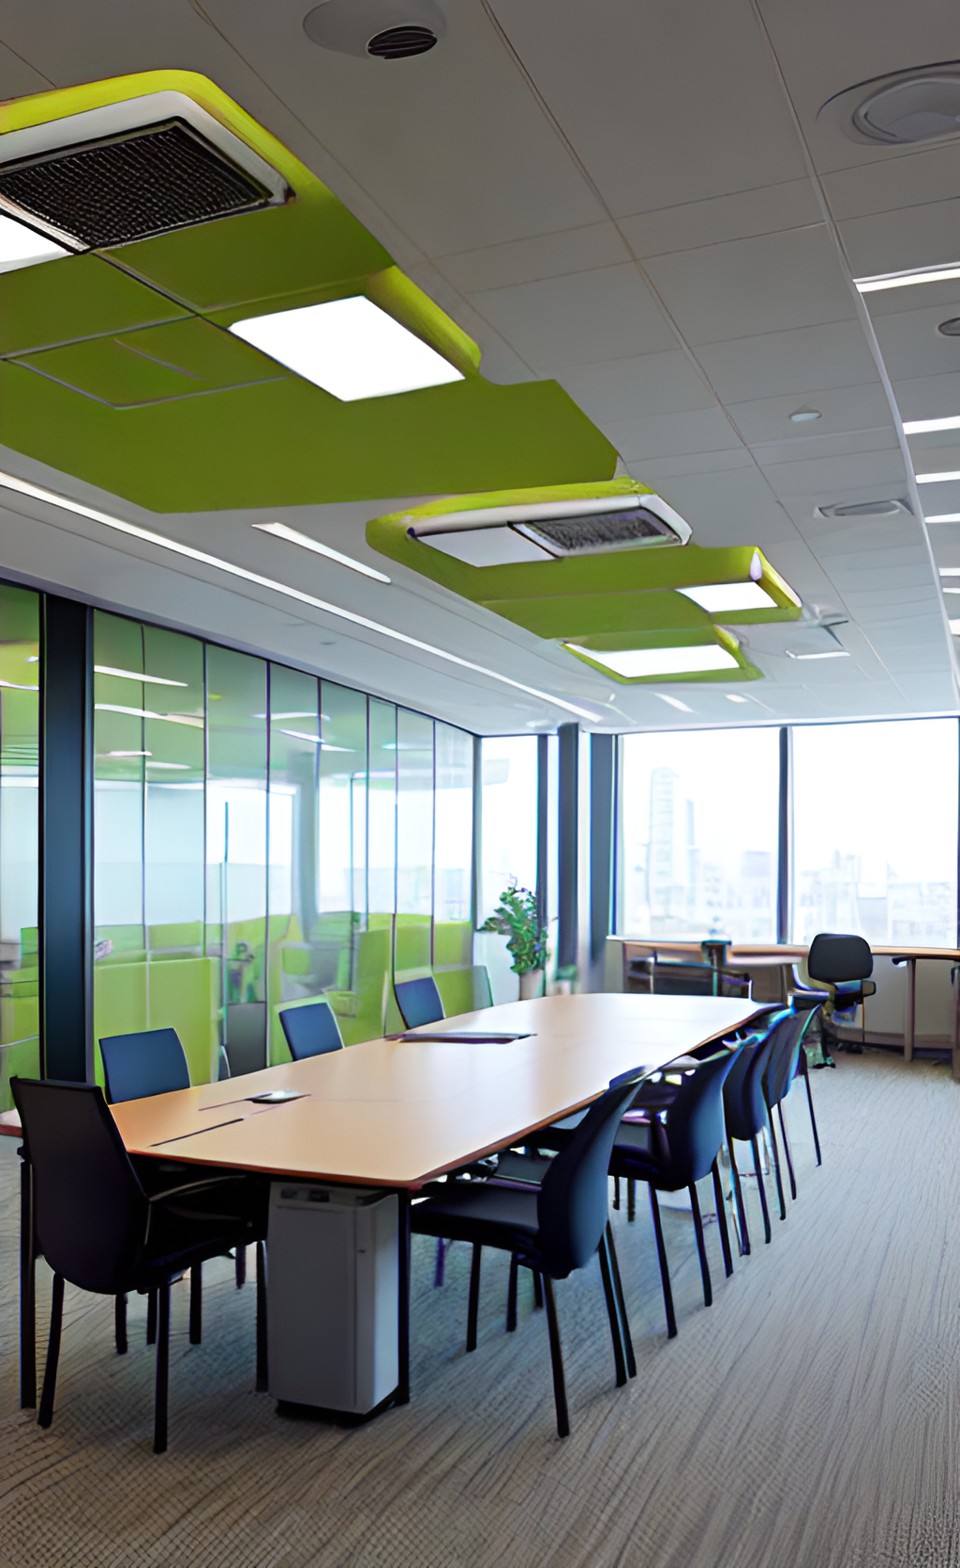 Biophilic Lighting Solutions for Healthier Work Environments